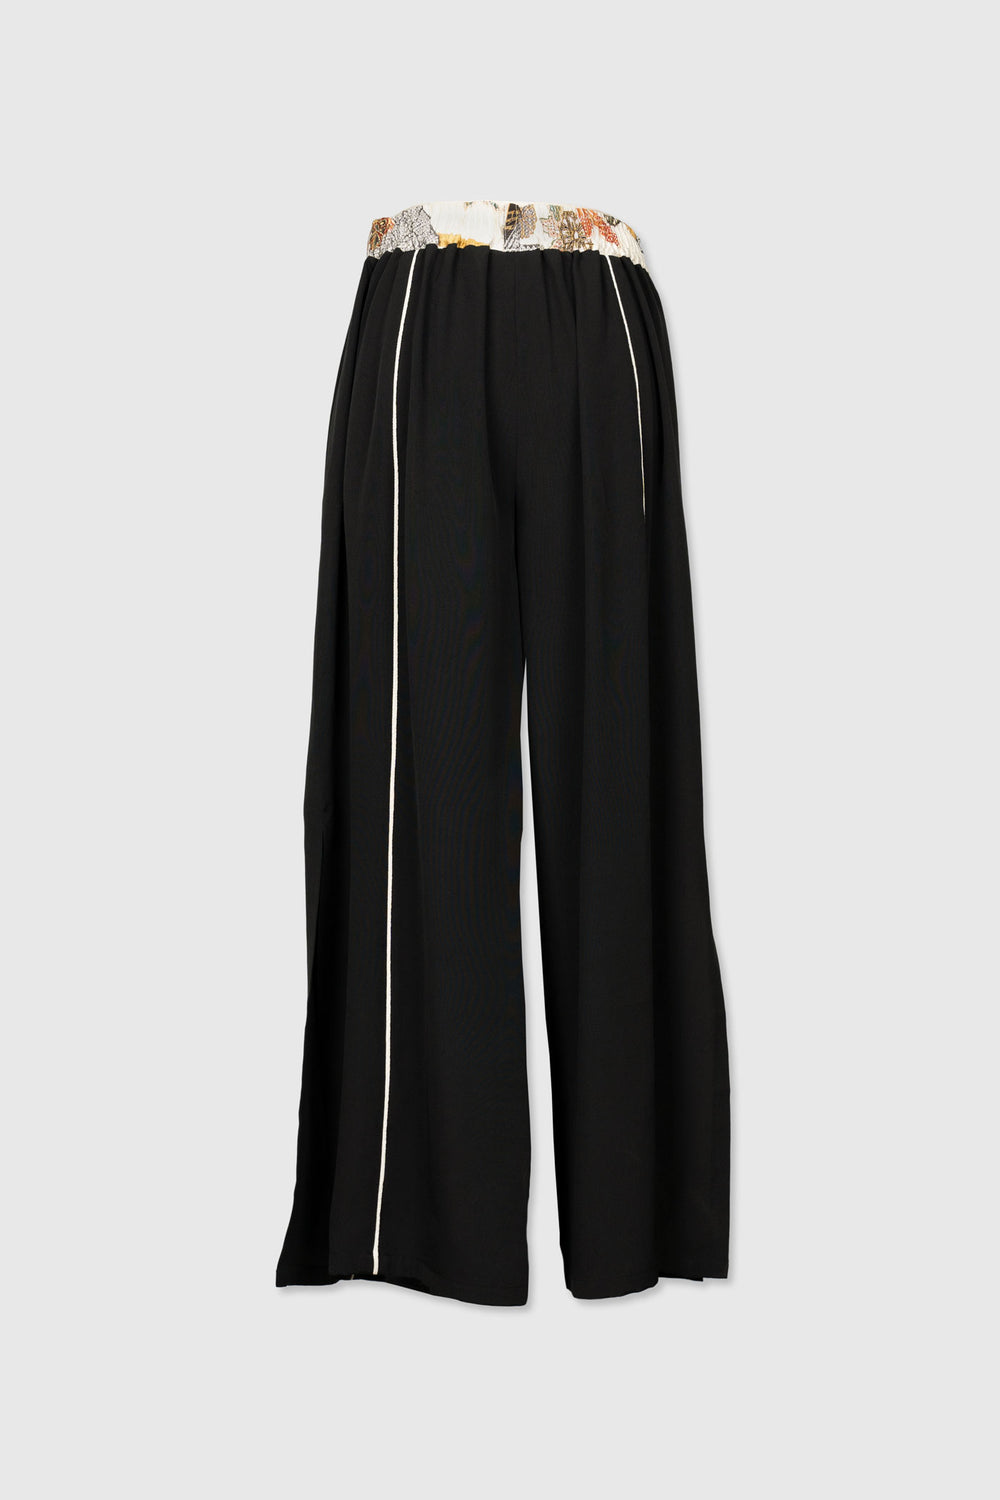 Black Palazzo Silk Trousers with White Piping & Side Slits | Yū